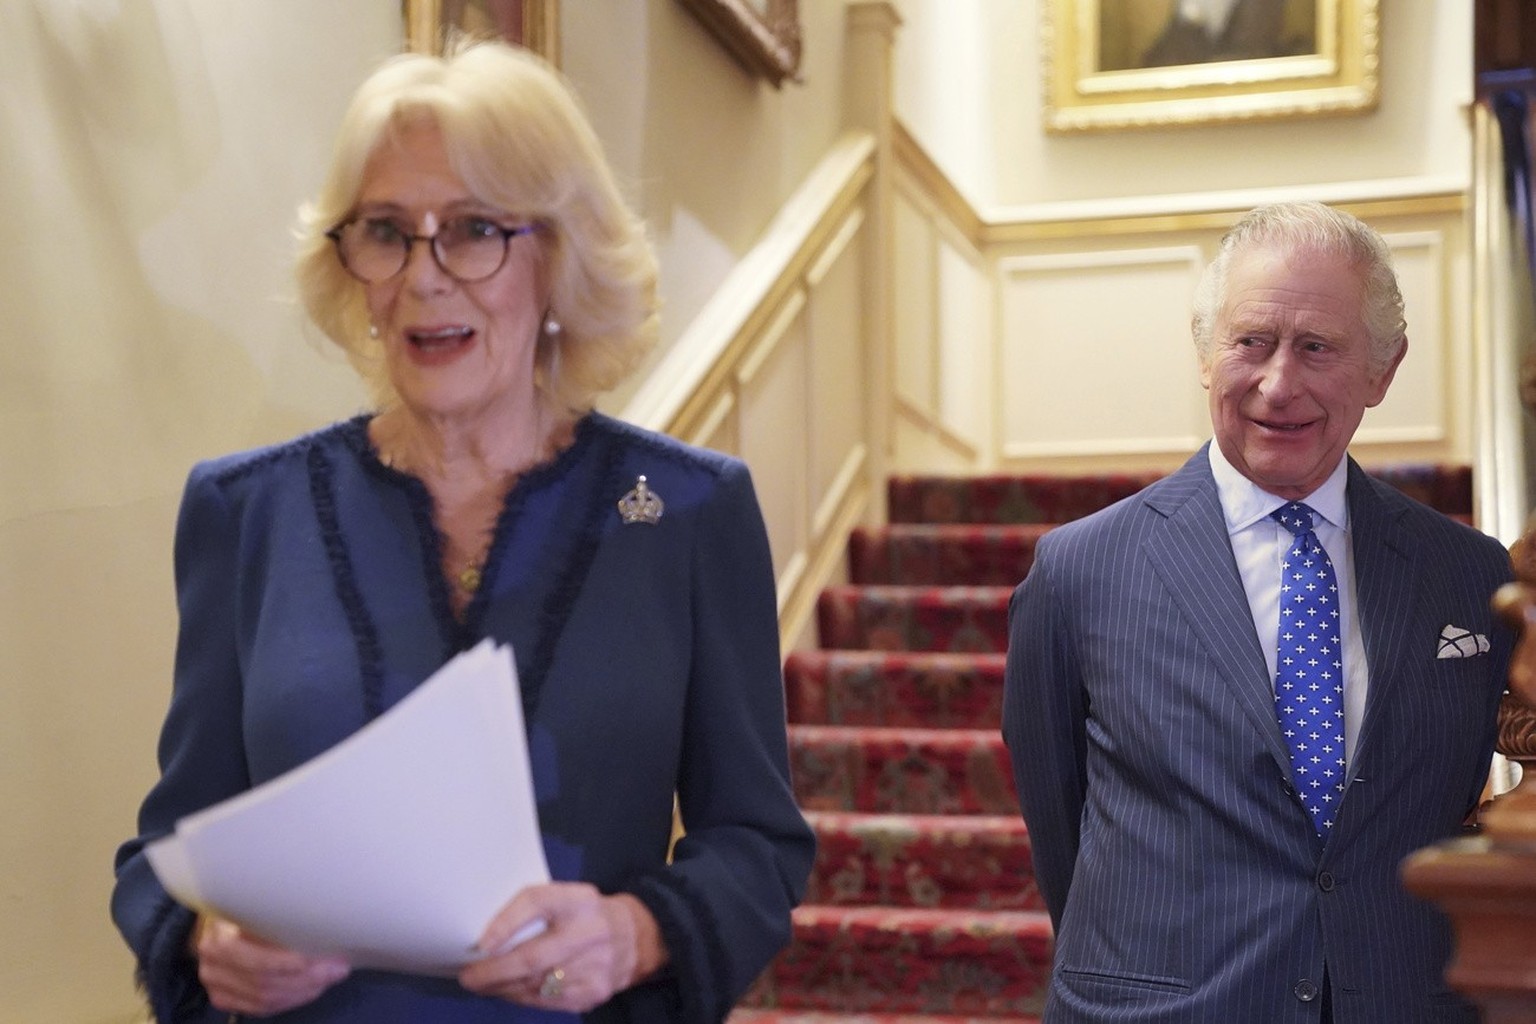 Camilla, the Queen Consort, joined by King Charles III, speaks as she hosts a reception at Clarence House in London, for authors, members of the literary community and representatives of literacy char ...